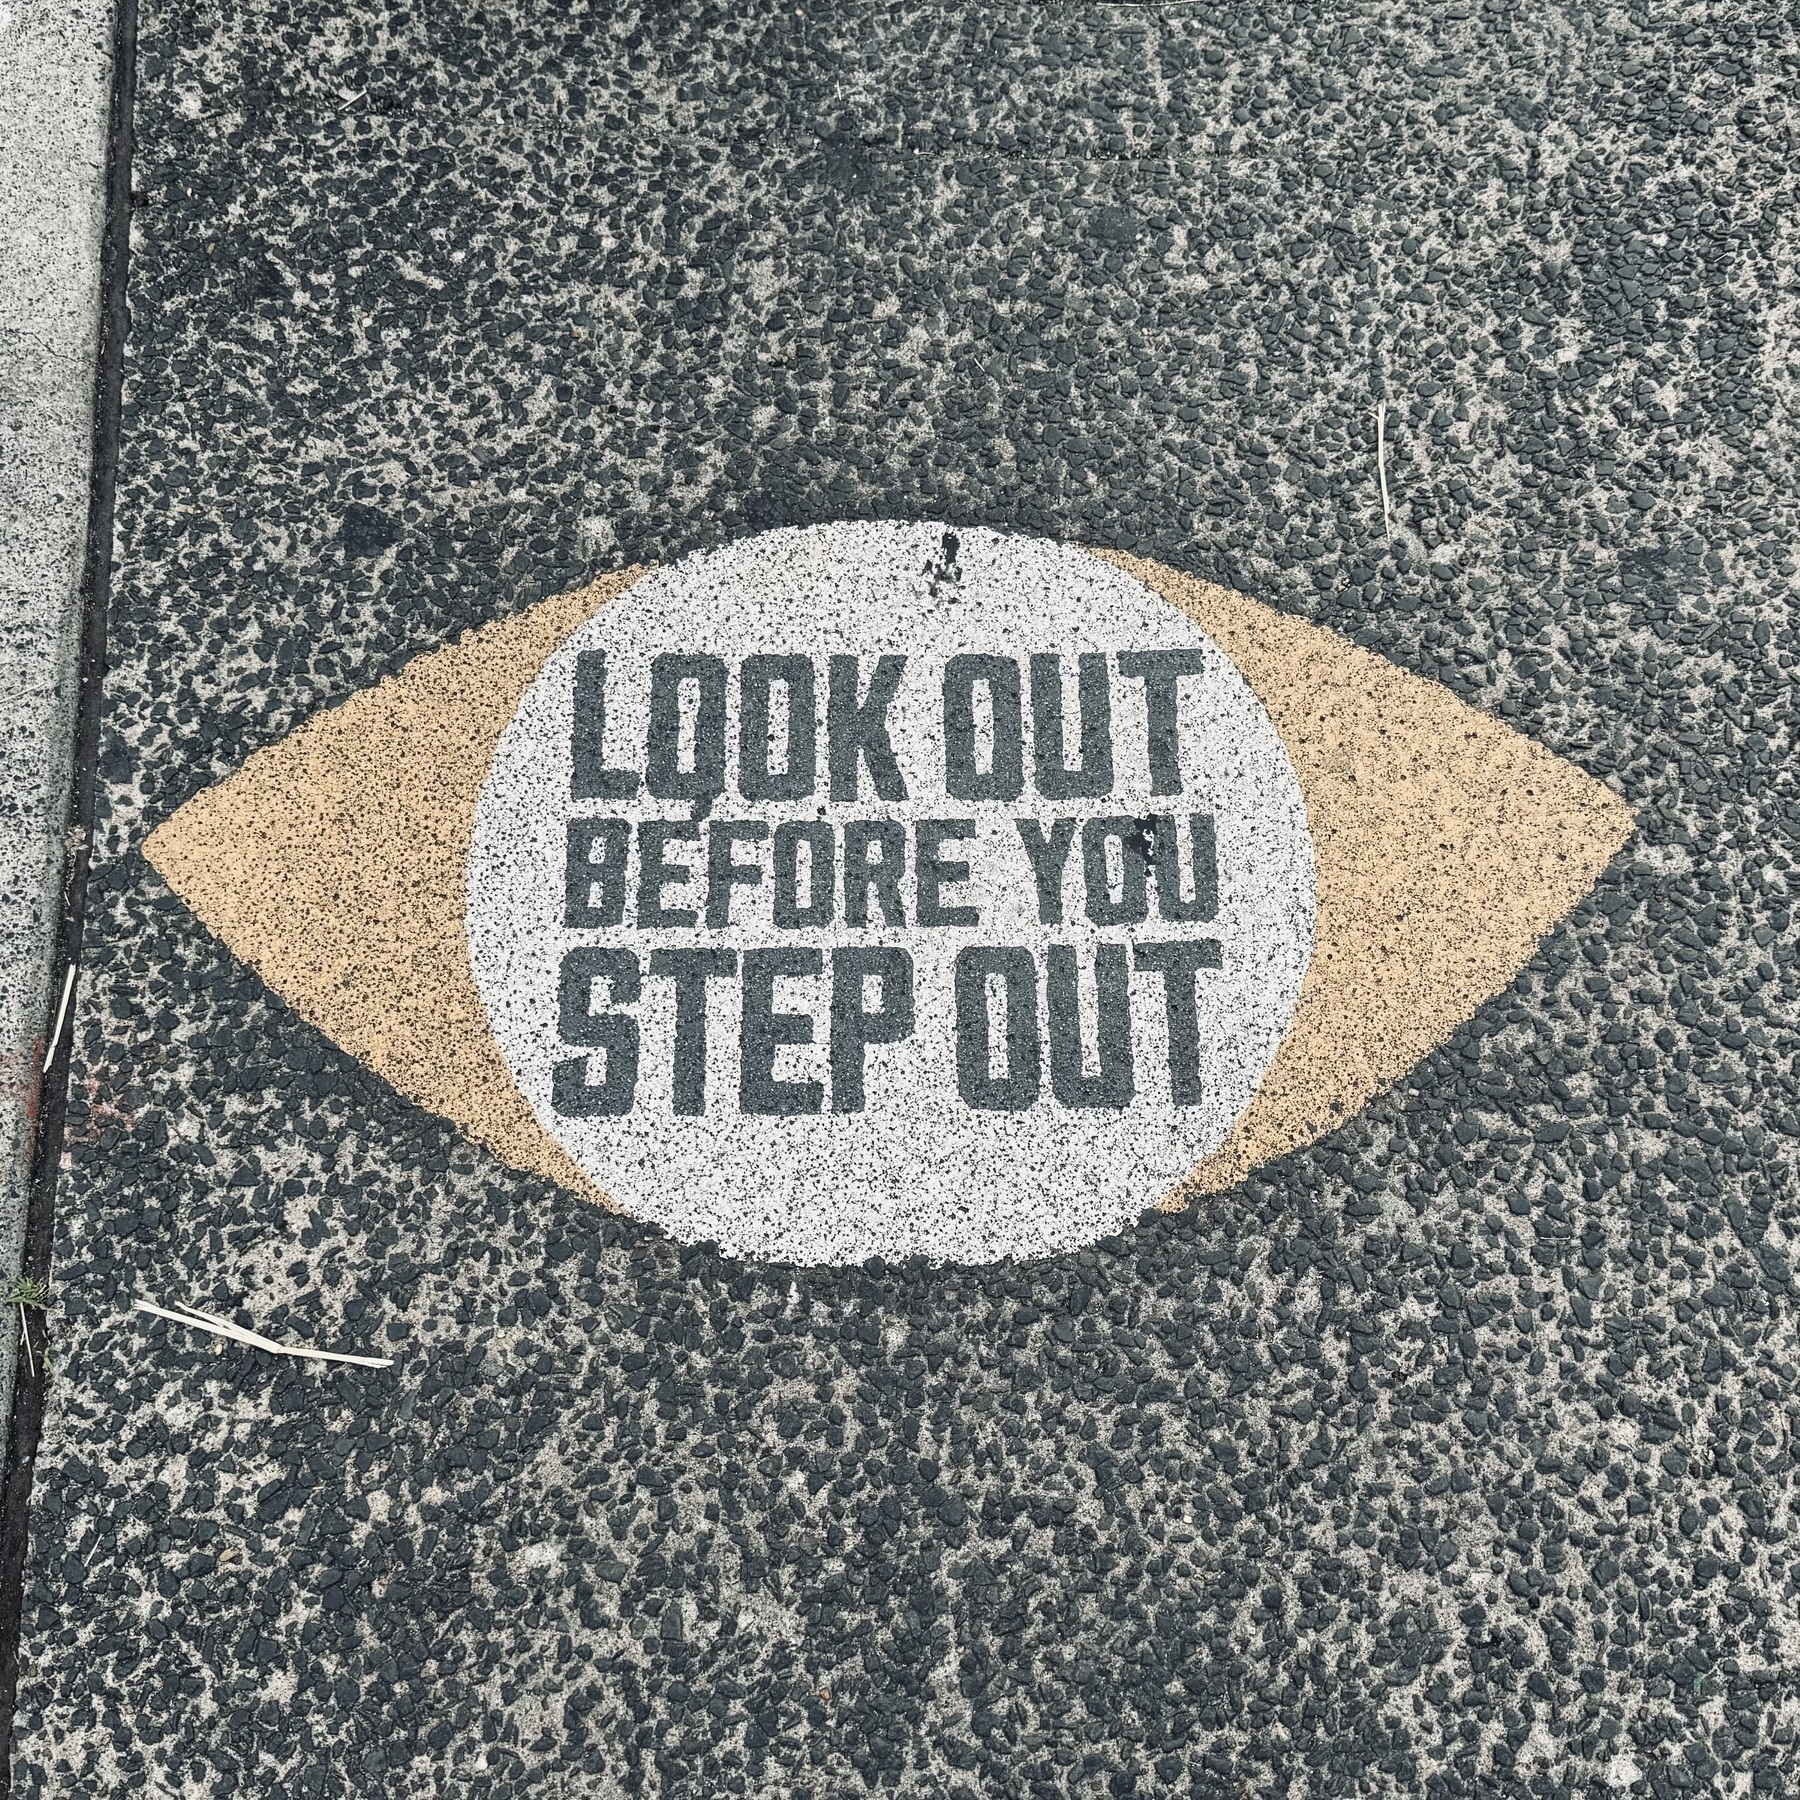 A warning that says “Look out before you step out” on the pavement by a crossing.